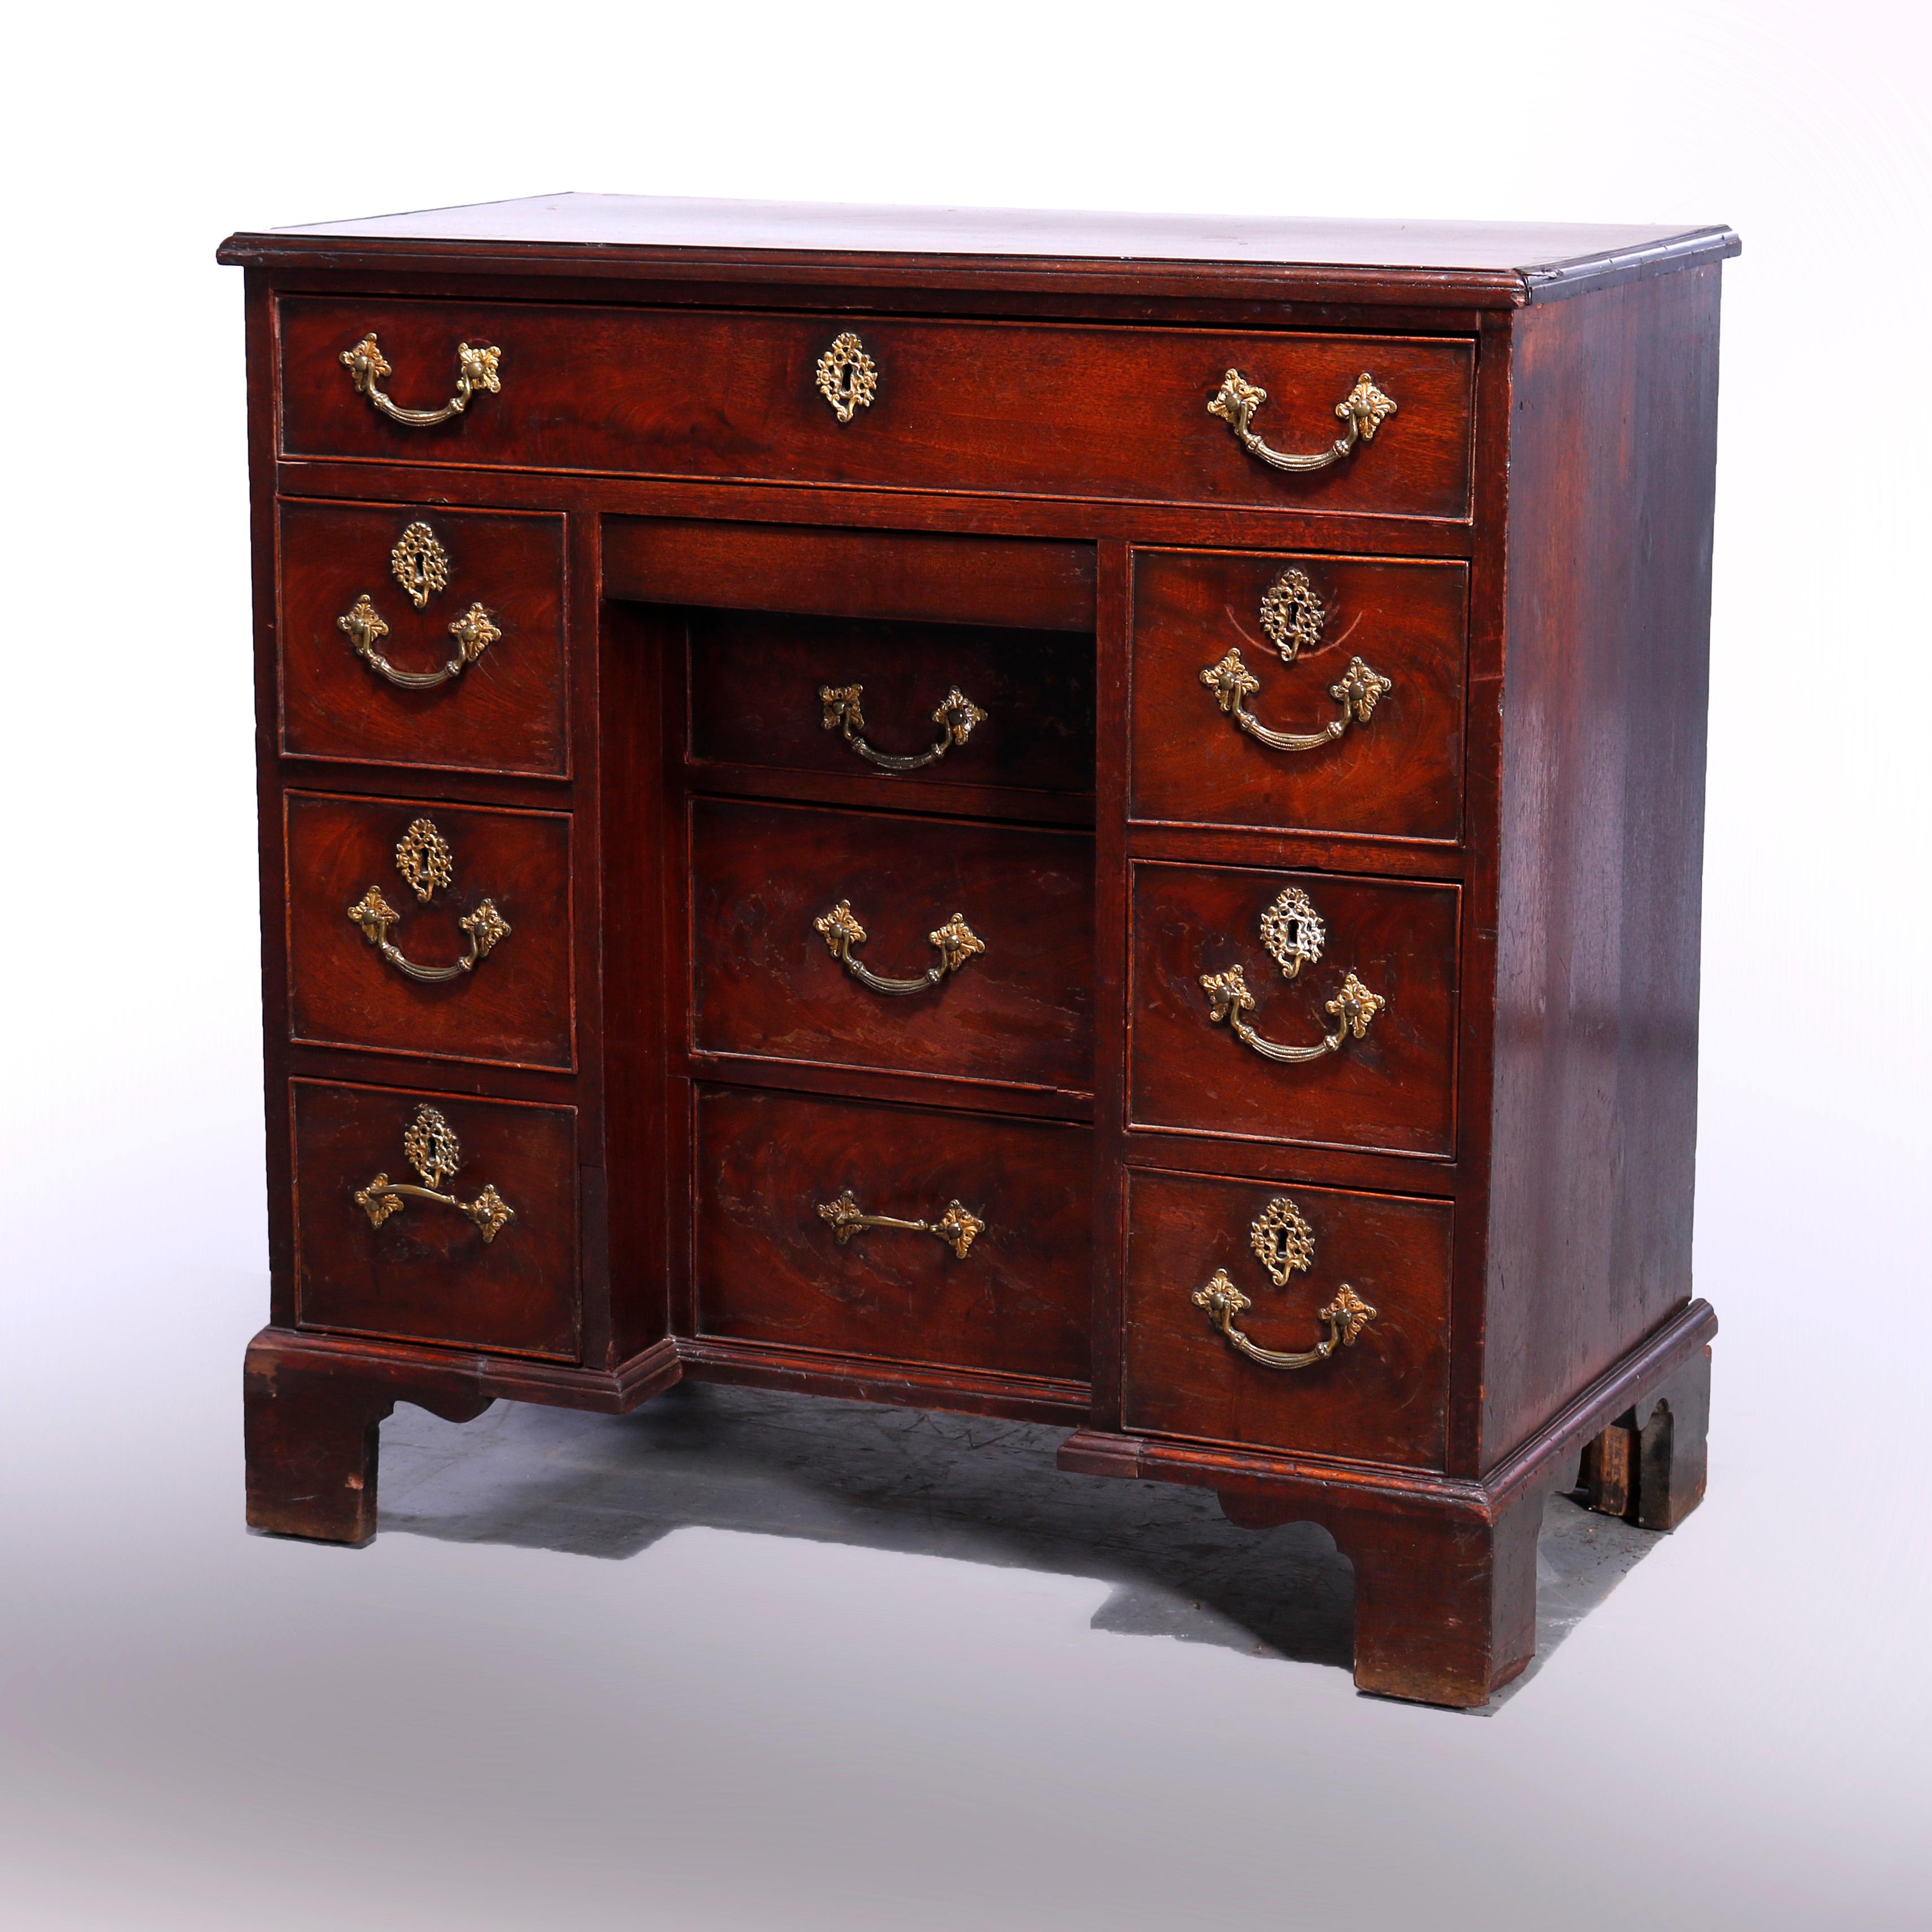 An antique English George III bachelor's chest offers mahogany construction with beveled top over three drawer towers, one recessed with others flanking, raised on bracket feet, c1830

Measures - 32.5'' H x 33'' W x 17'' D.